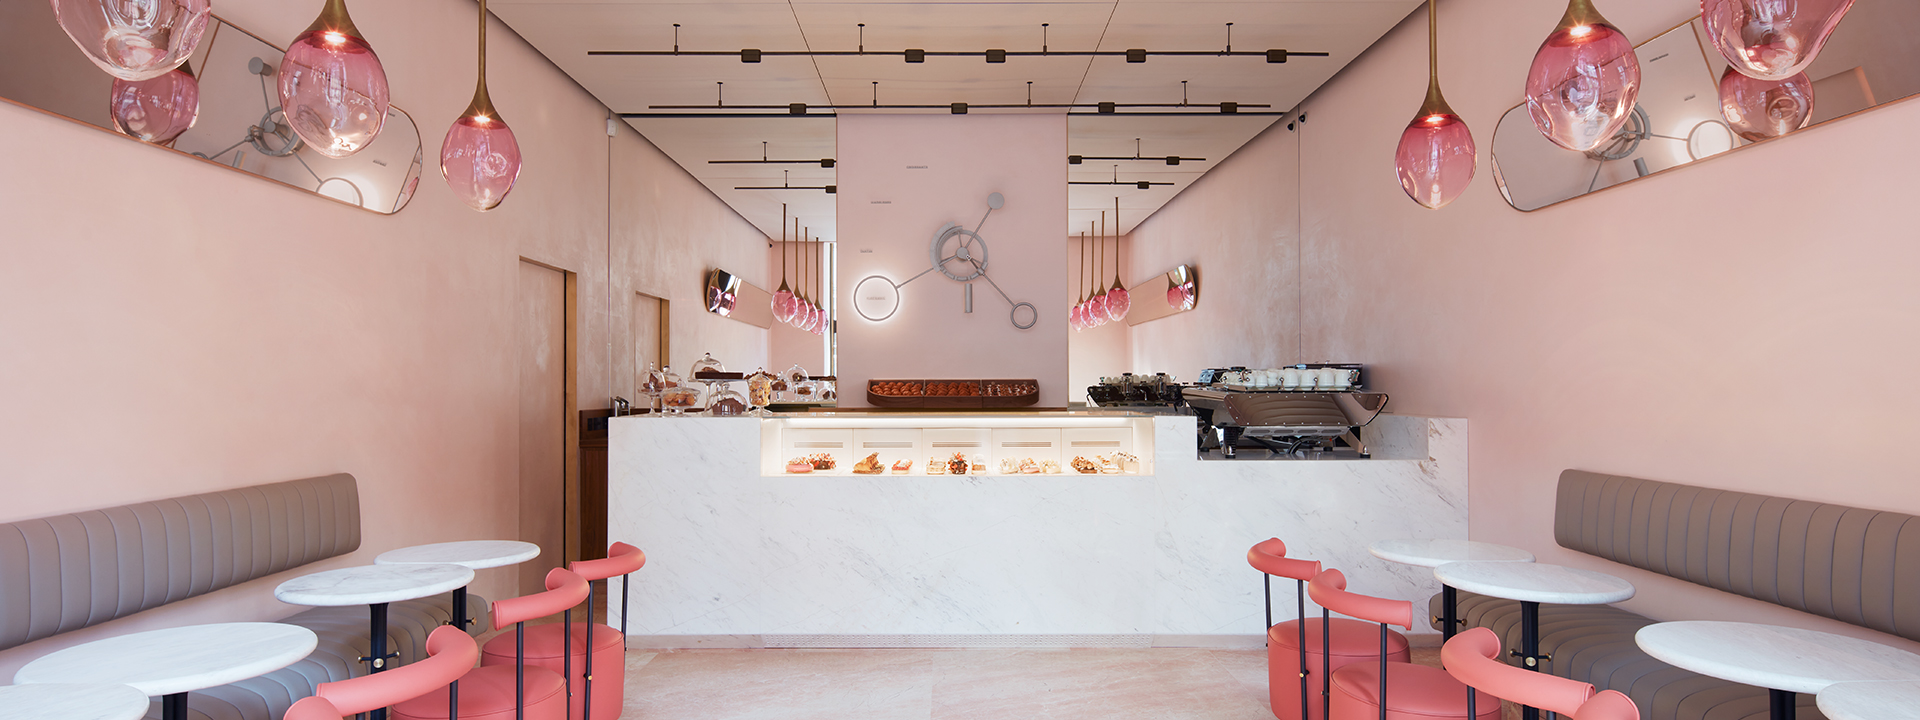 The pink interior of The Connaught patisserie; desserts on display modern seating area.